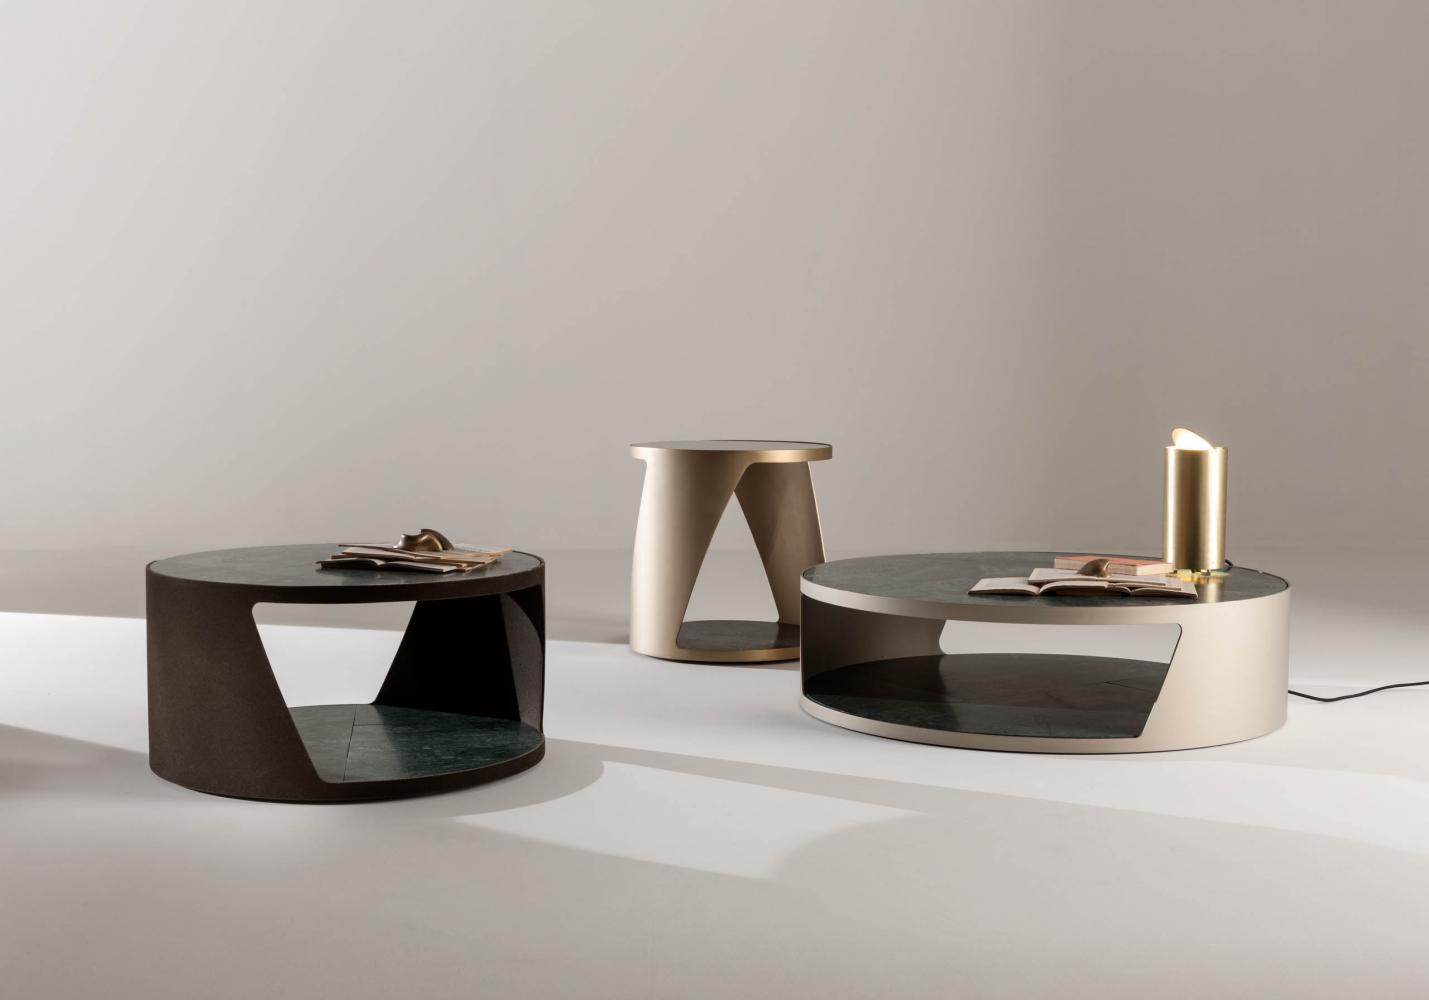 Shadow luxury modern design round coffee tables in metal brass finish, marble and crystal glass